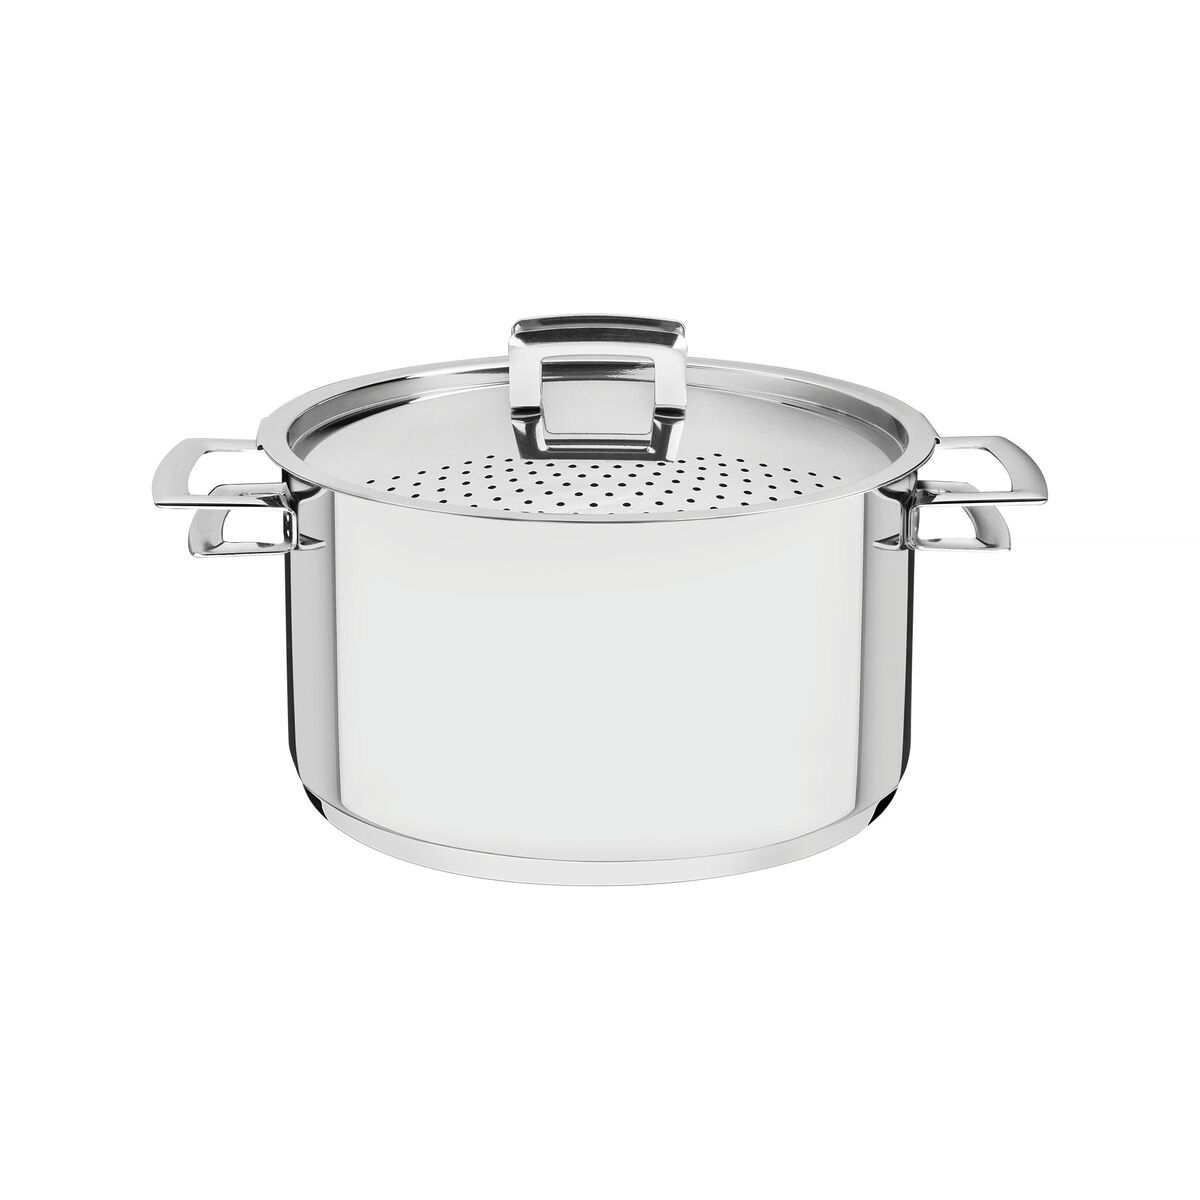 Tramontina Brava stainless steel pasta cooker with lid, handles and tri-ply base, 24 cm 6.1 L